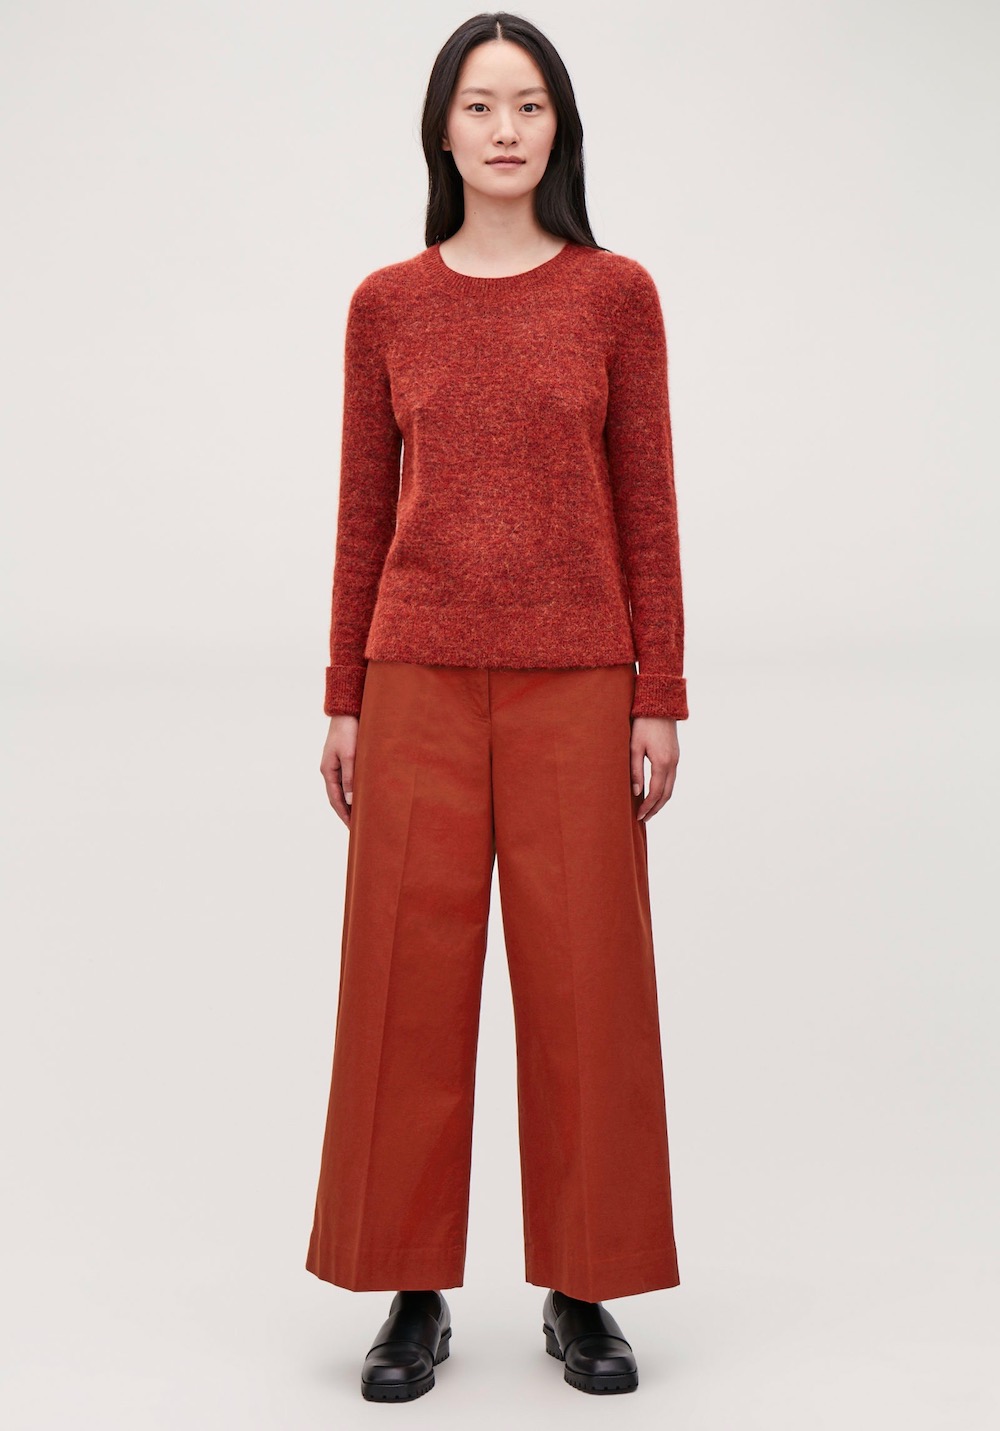 Best Wide-Leg Pants for Fall 2019 - theFashionSpot